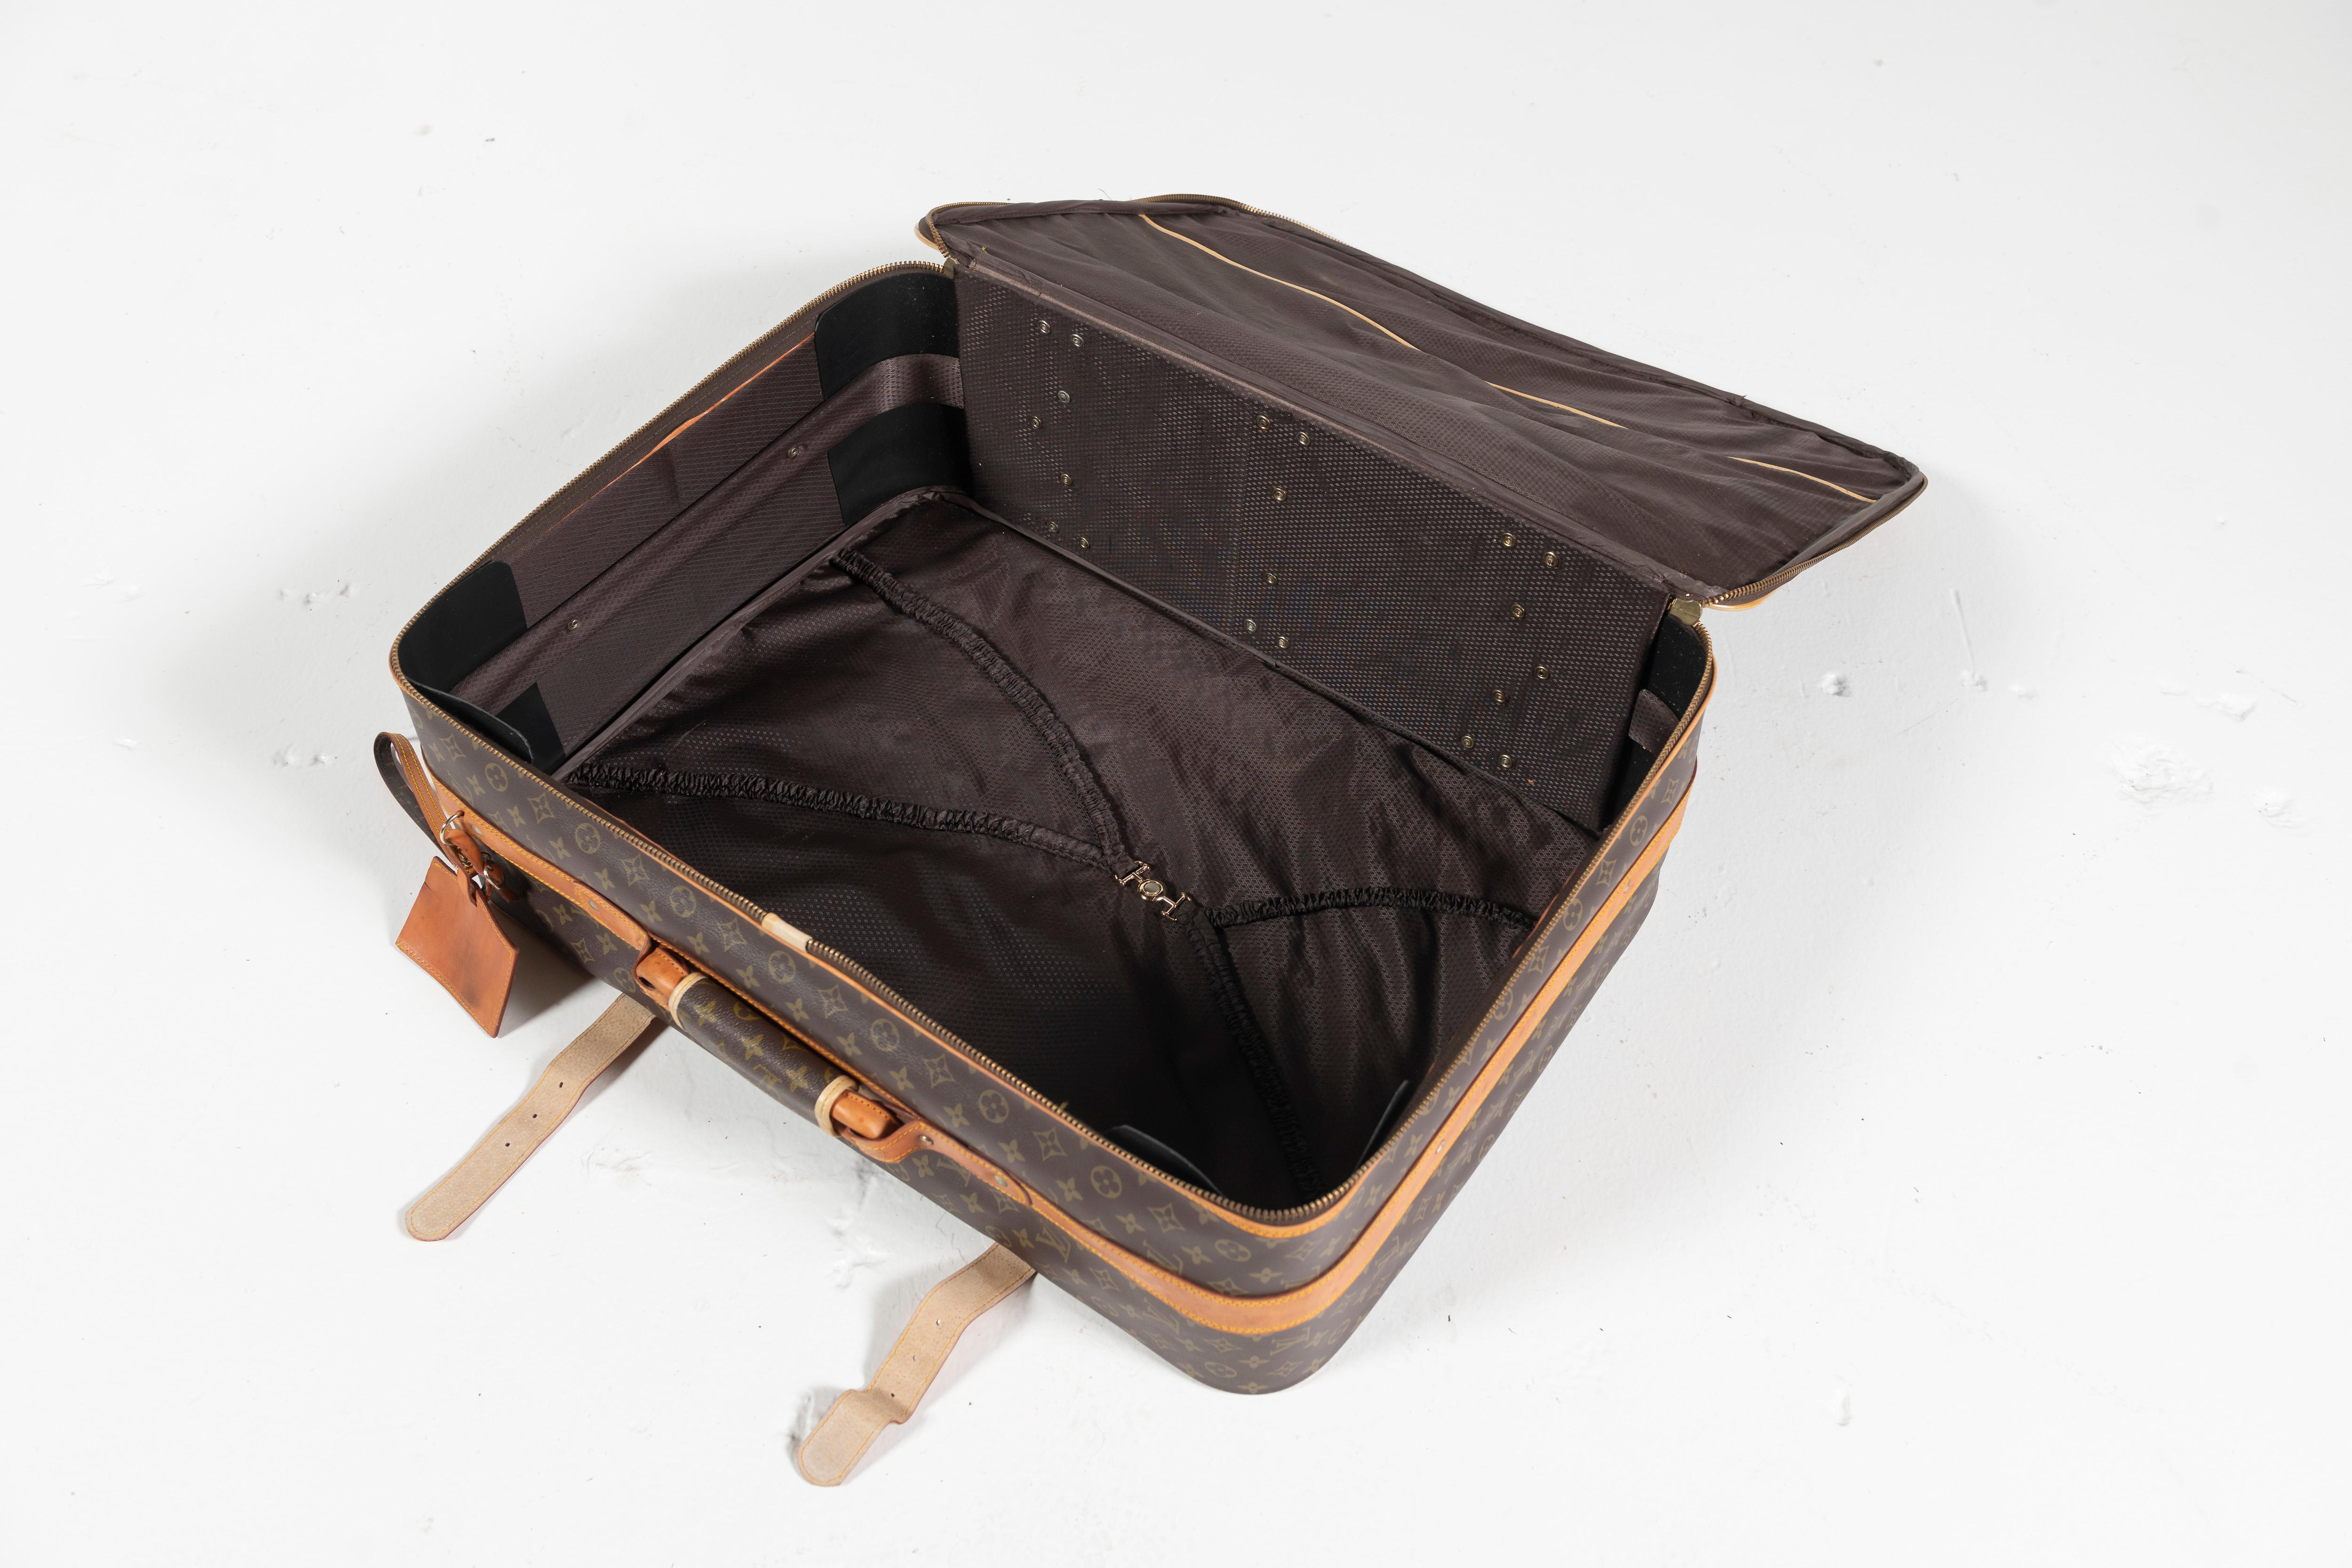 Vintage classic Louis Vuitton soft side suitcase with leather trims, zipper closure and wheels for easy transport. Open interior for you to pack as you like. Medium sized. 